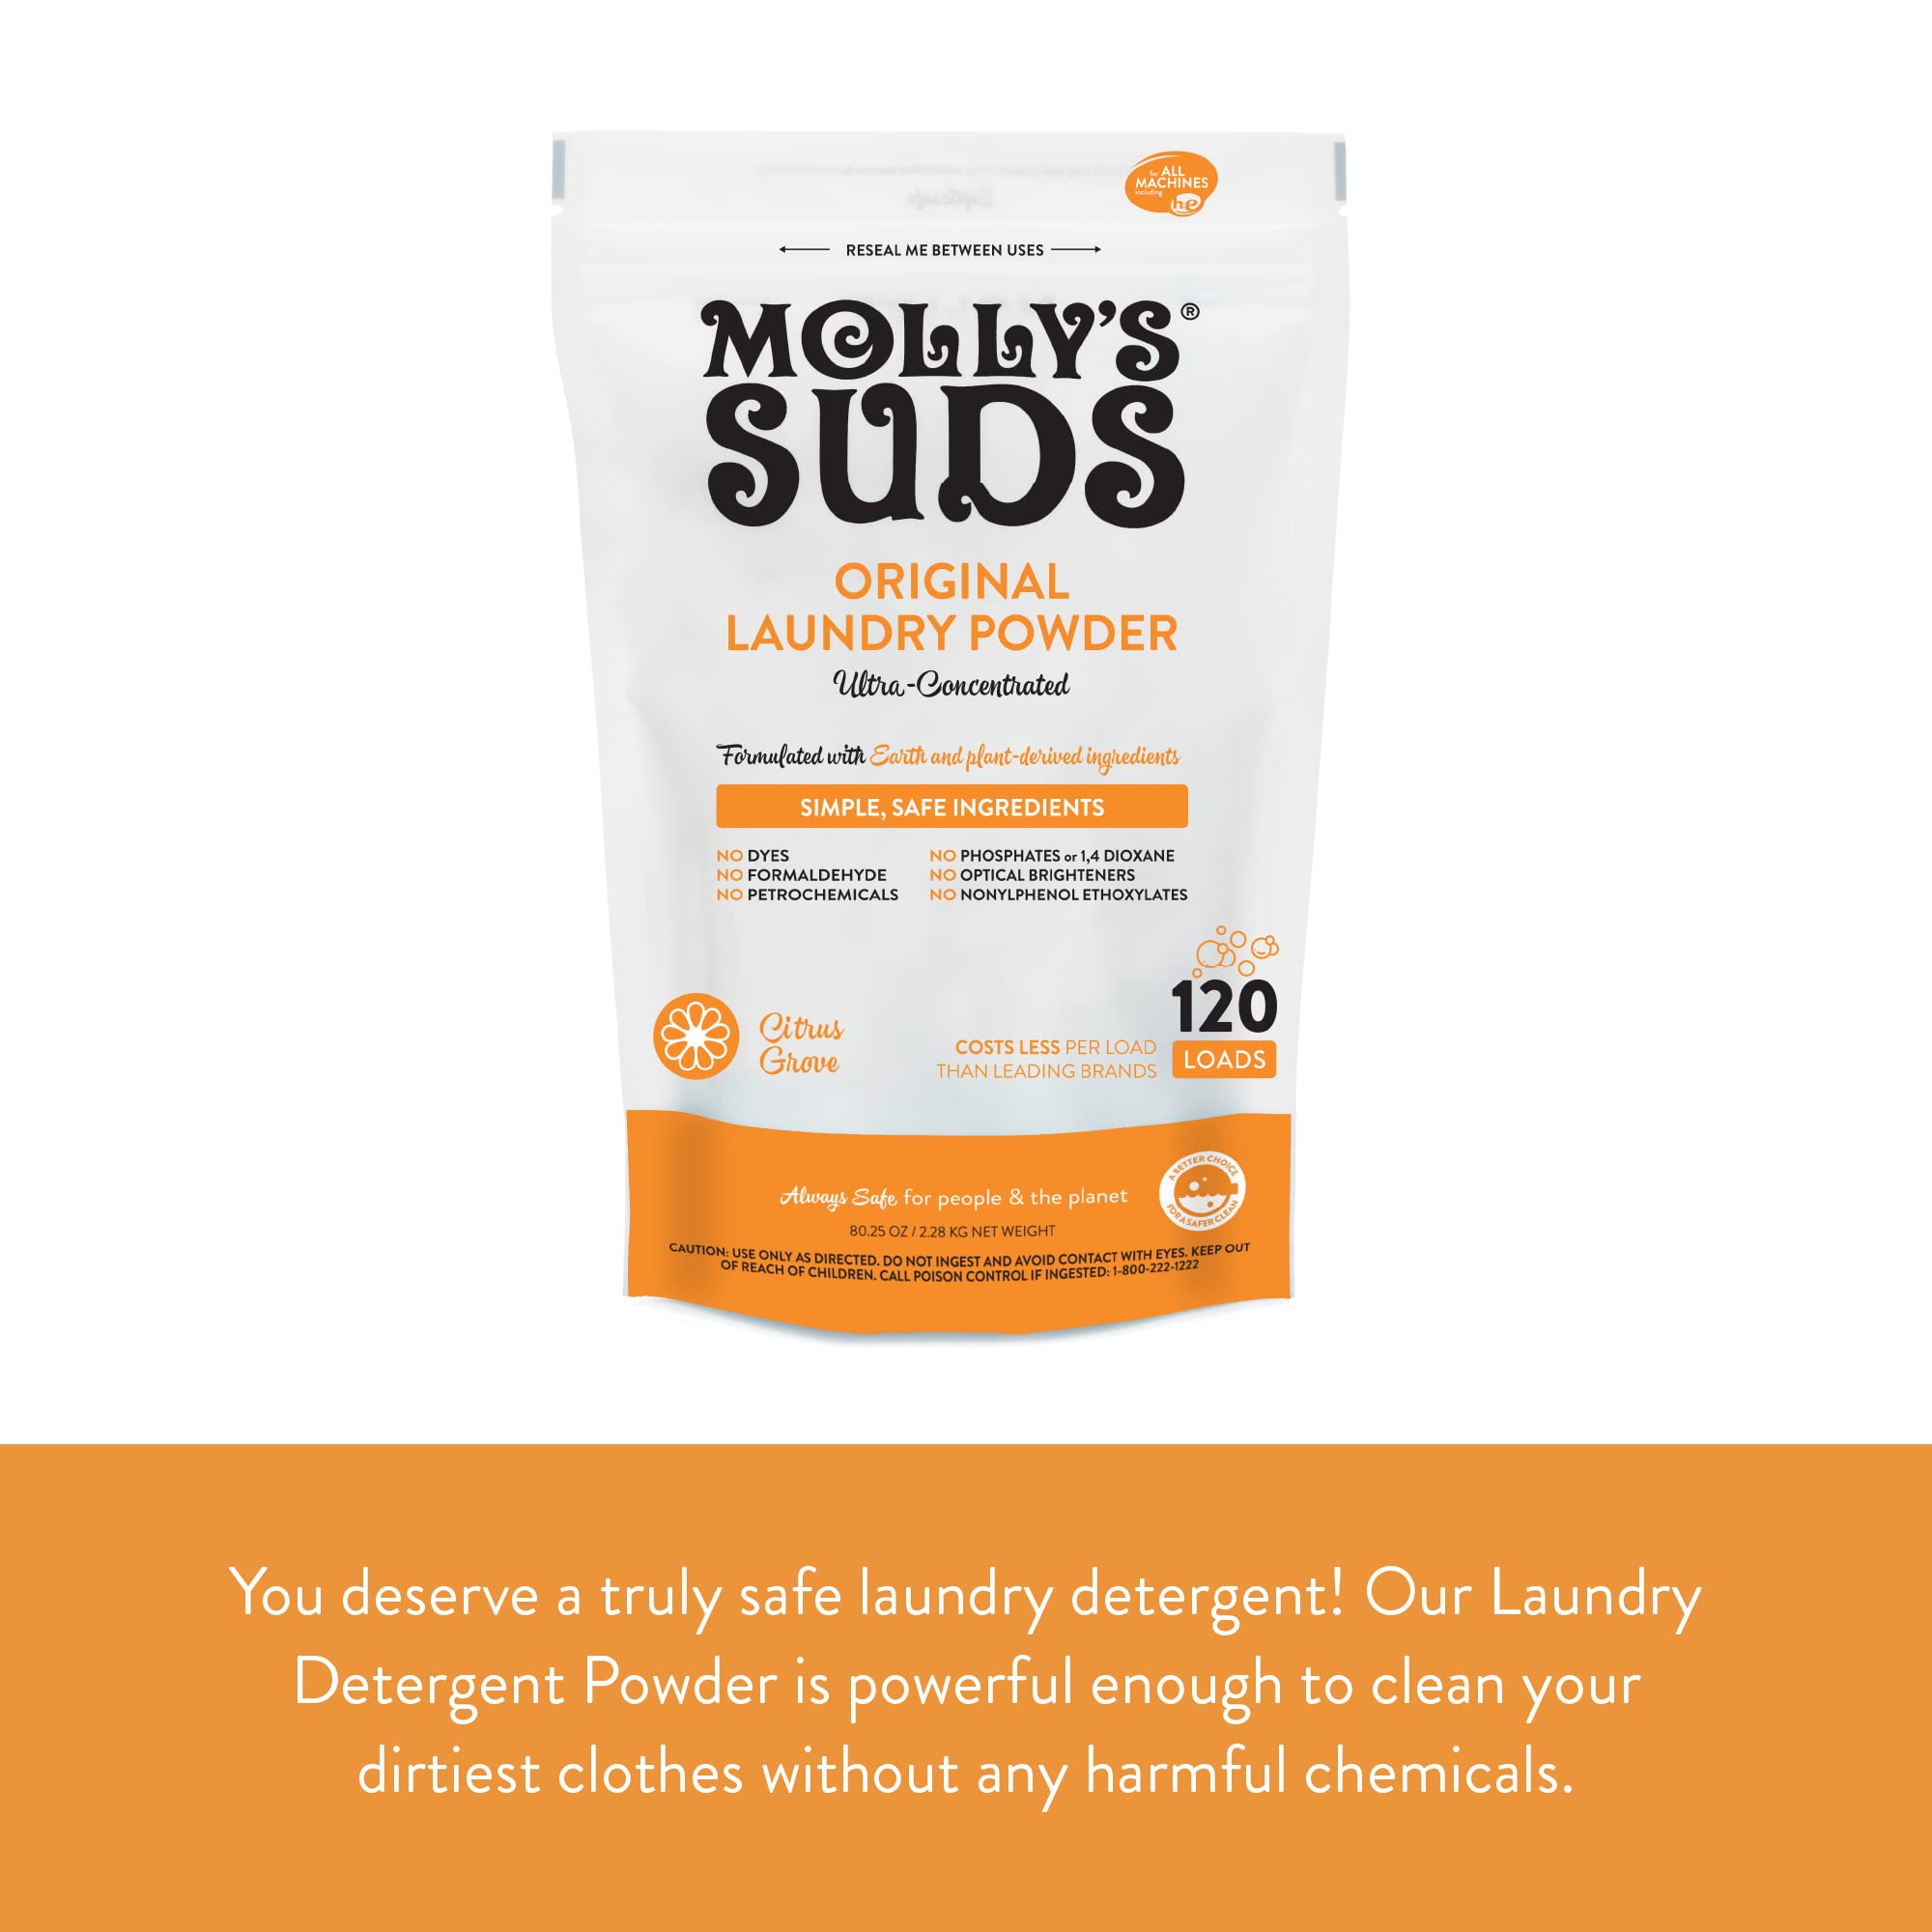 Molly's Suds Original Laundry Detergent Powder | Natural Laundry Detergent Powder for Sensitive Skin | Earth-Derived Ingredients, Stain Fighting | 120 Loads (Citrus Grove)